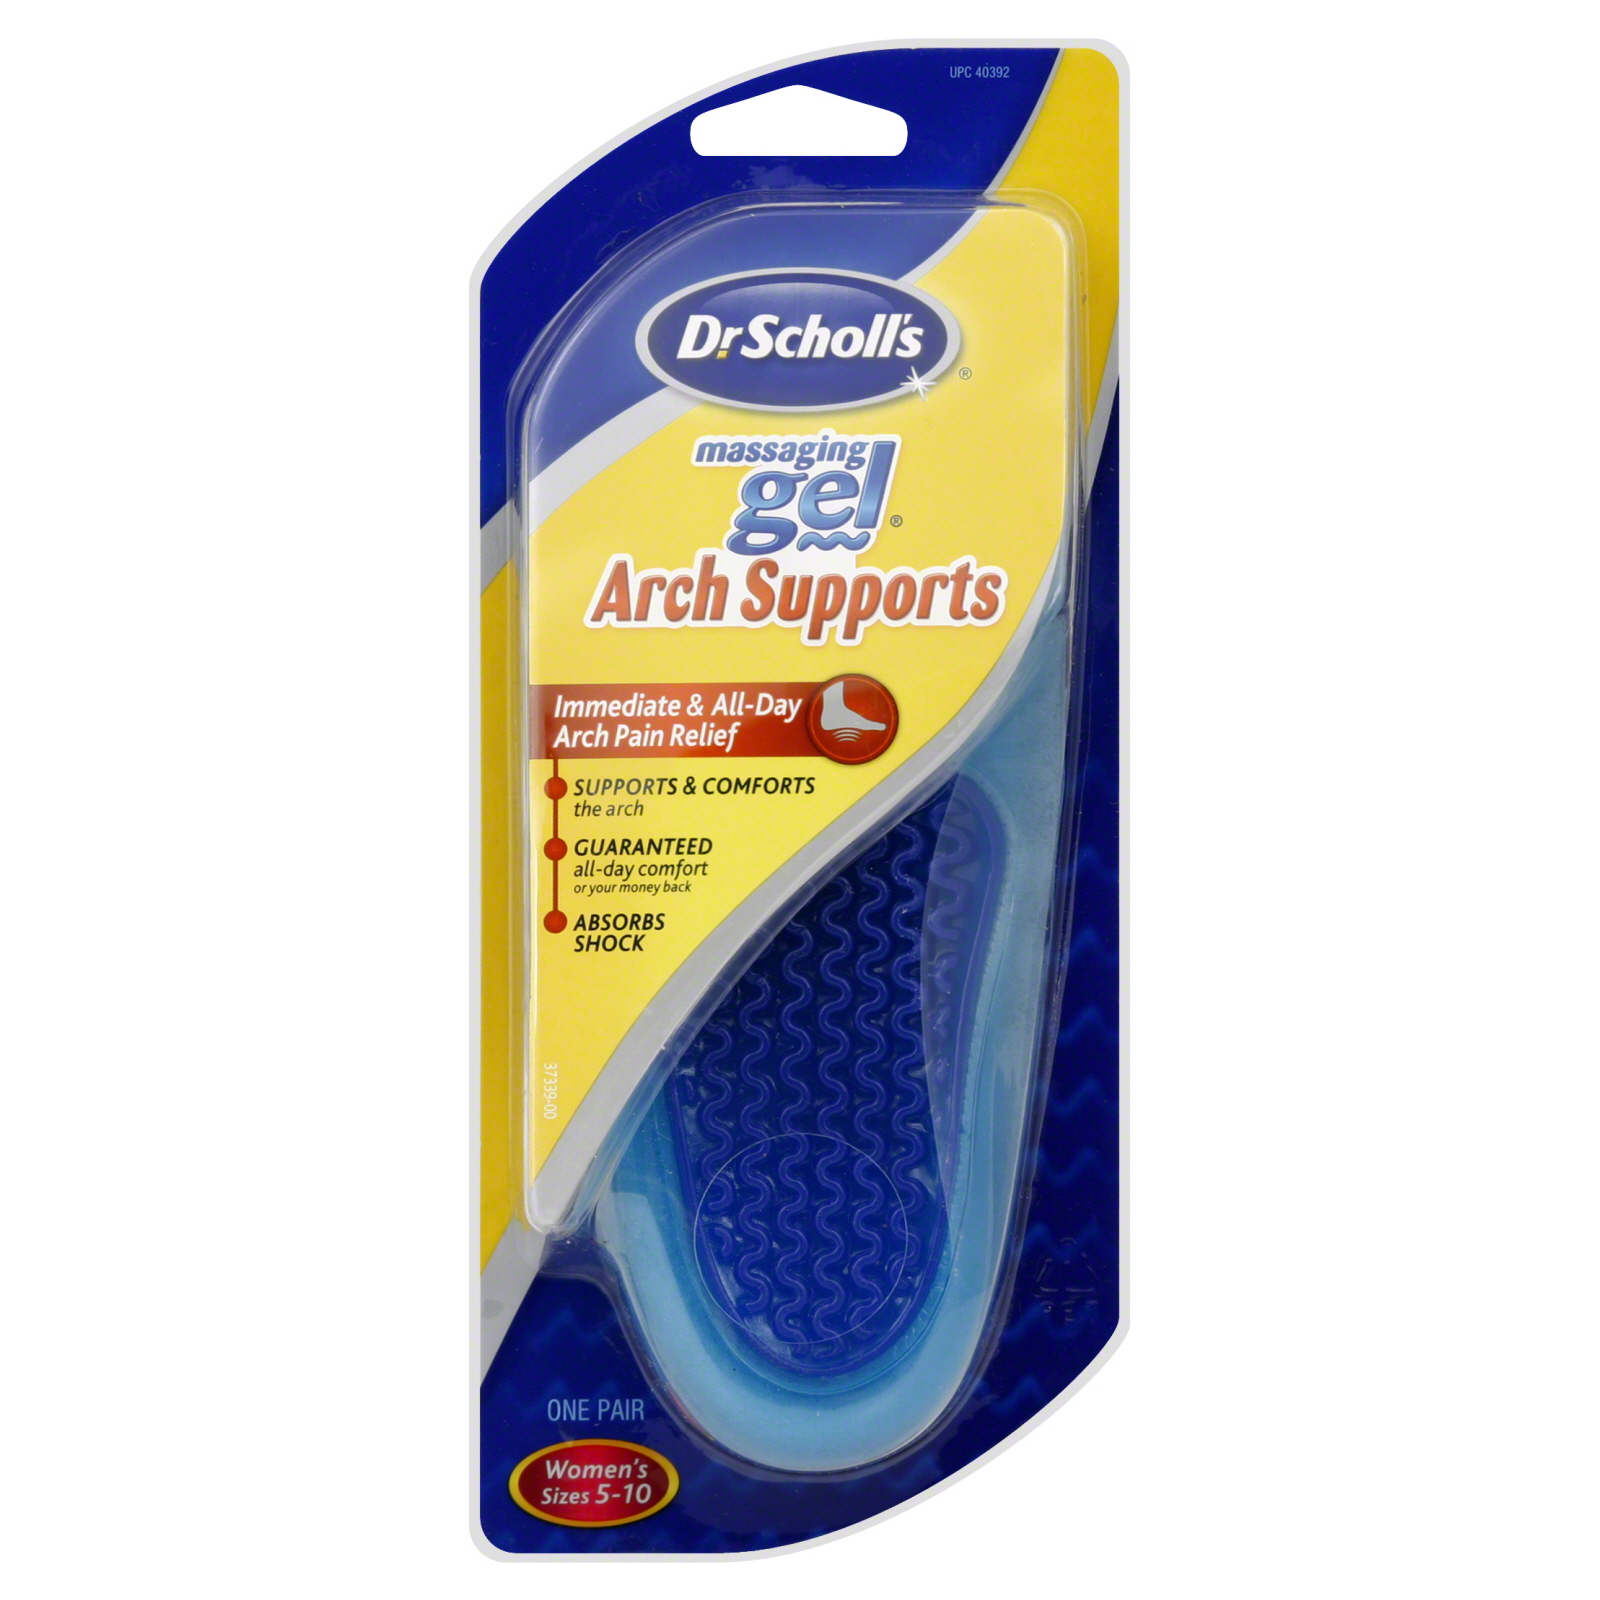 Dr. Scholl's Arch Supports, Massaging Gel, Women's Sizes 5-10, 1 pair